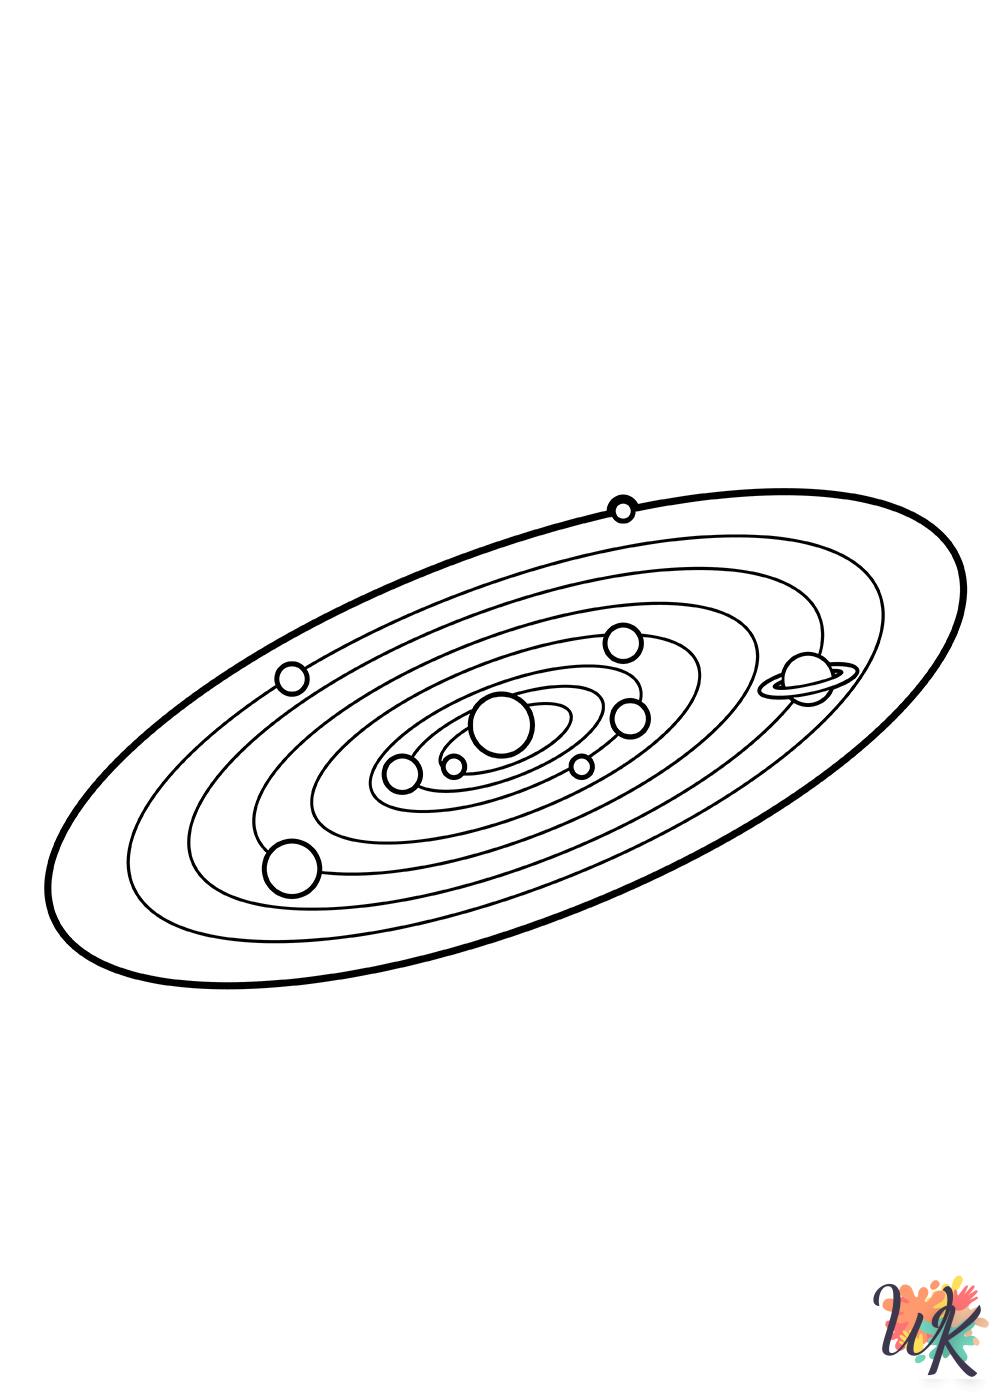 Solar System free coloring pages